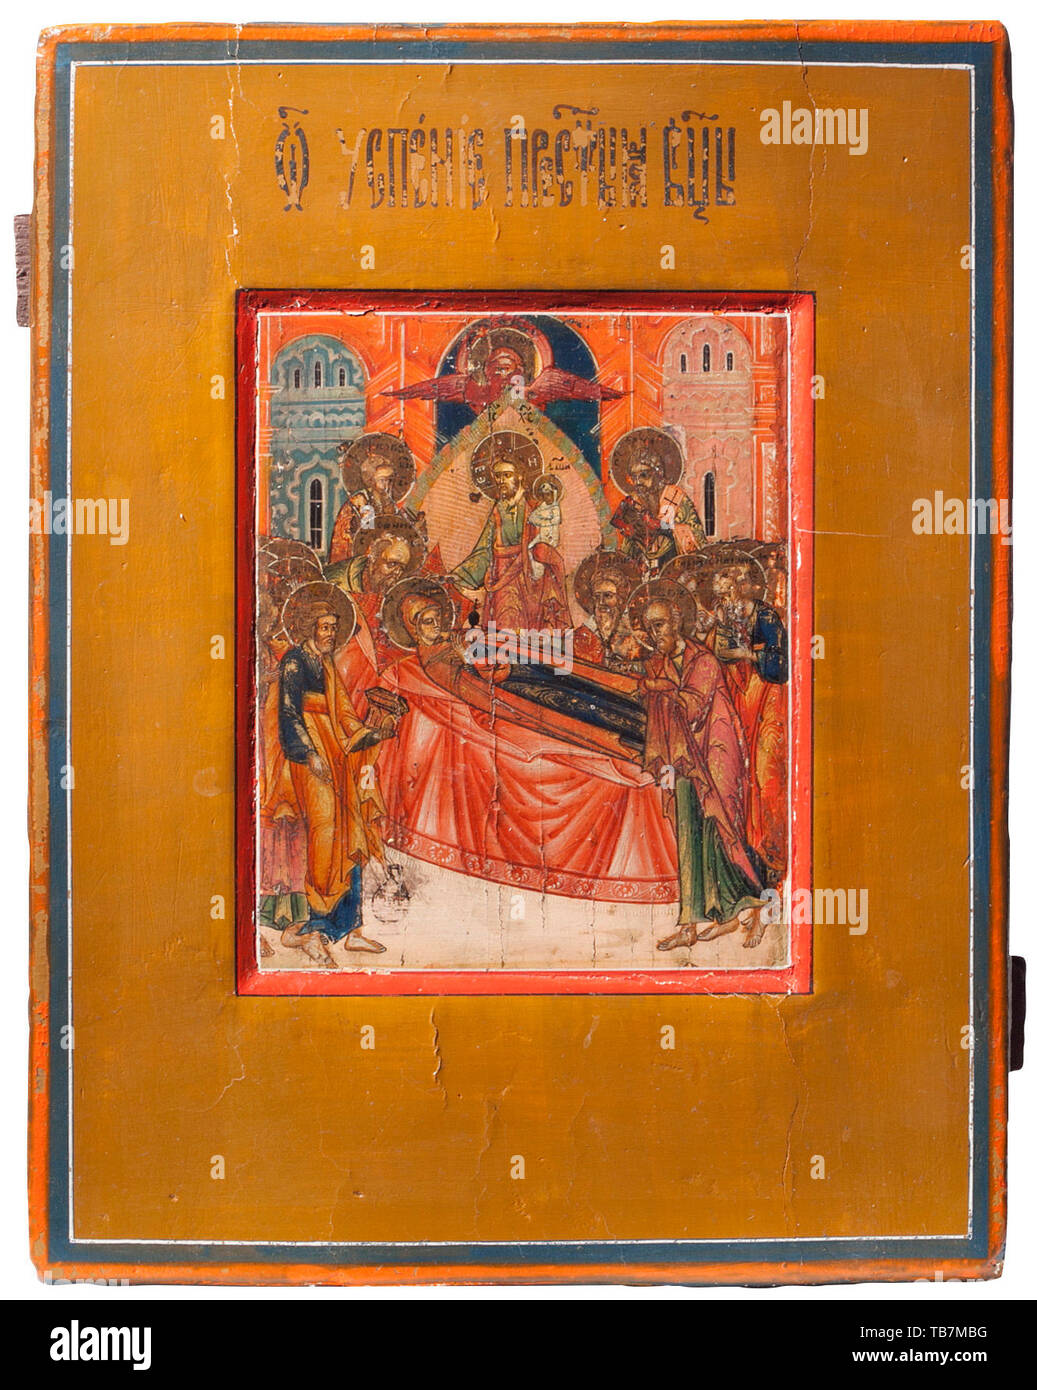 A Russian icon 'The Dormition of Mary', 19th century, Egg tempera on wood with a kovcheg depicting the death of Mary. She is surrounded by the Apostles, and Jesus is in the background receiving her soul as a child. USA-lot. historic, historical 19th century, Additional-Rights-Clearance-Info-Not-Available Stock Photo